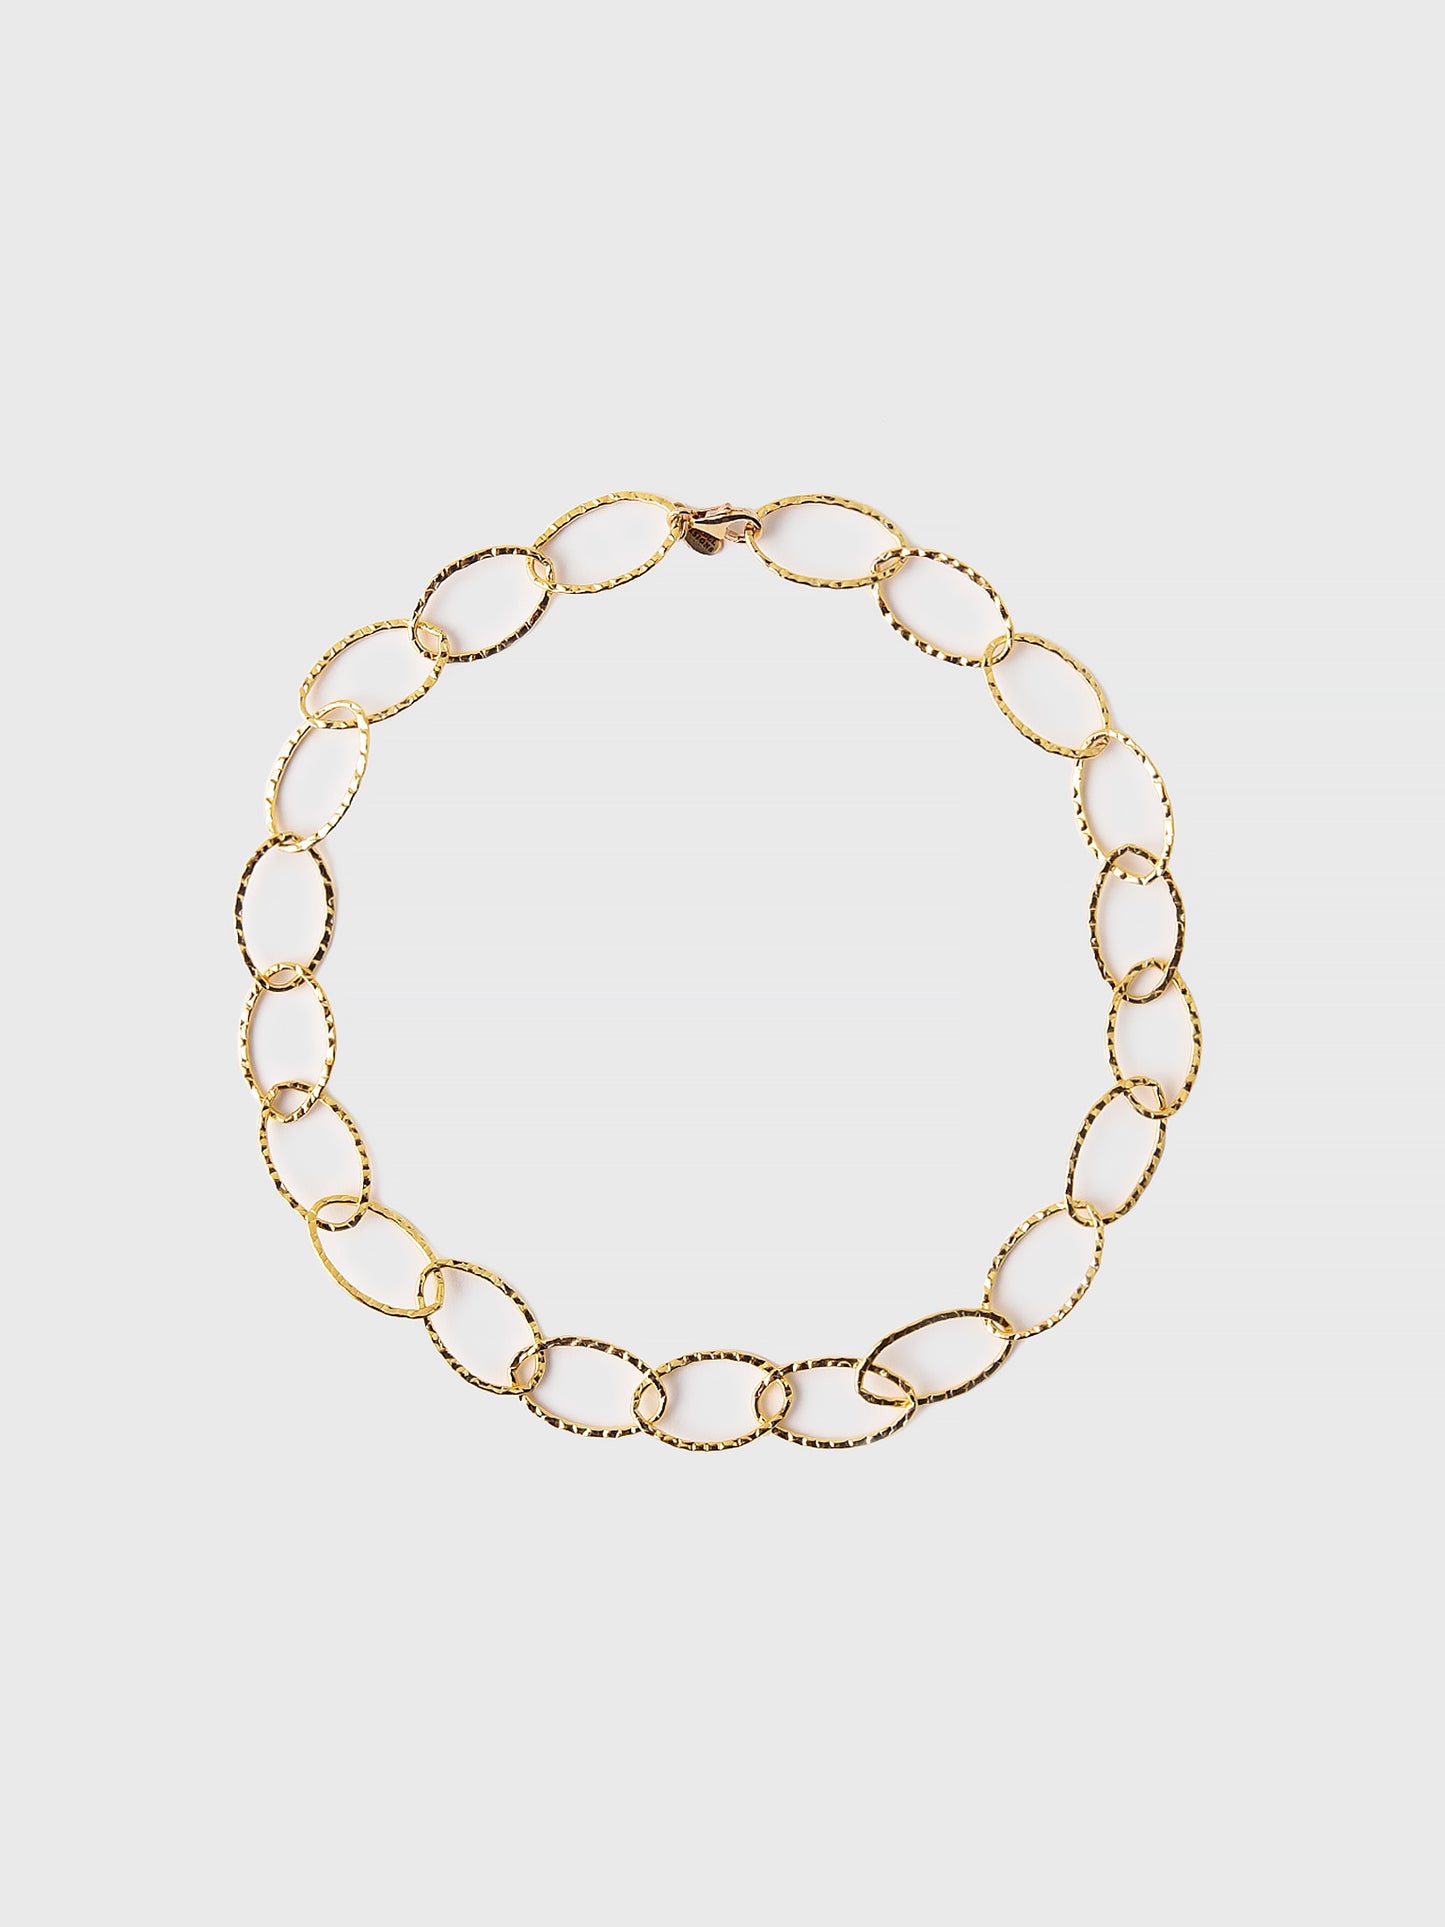 S. Bell Women's Classic Chain Necklace